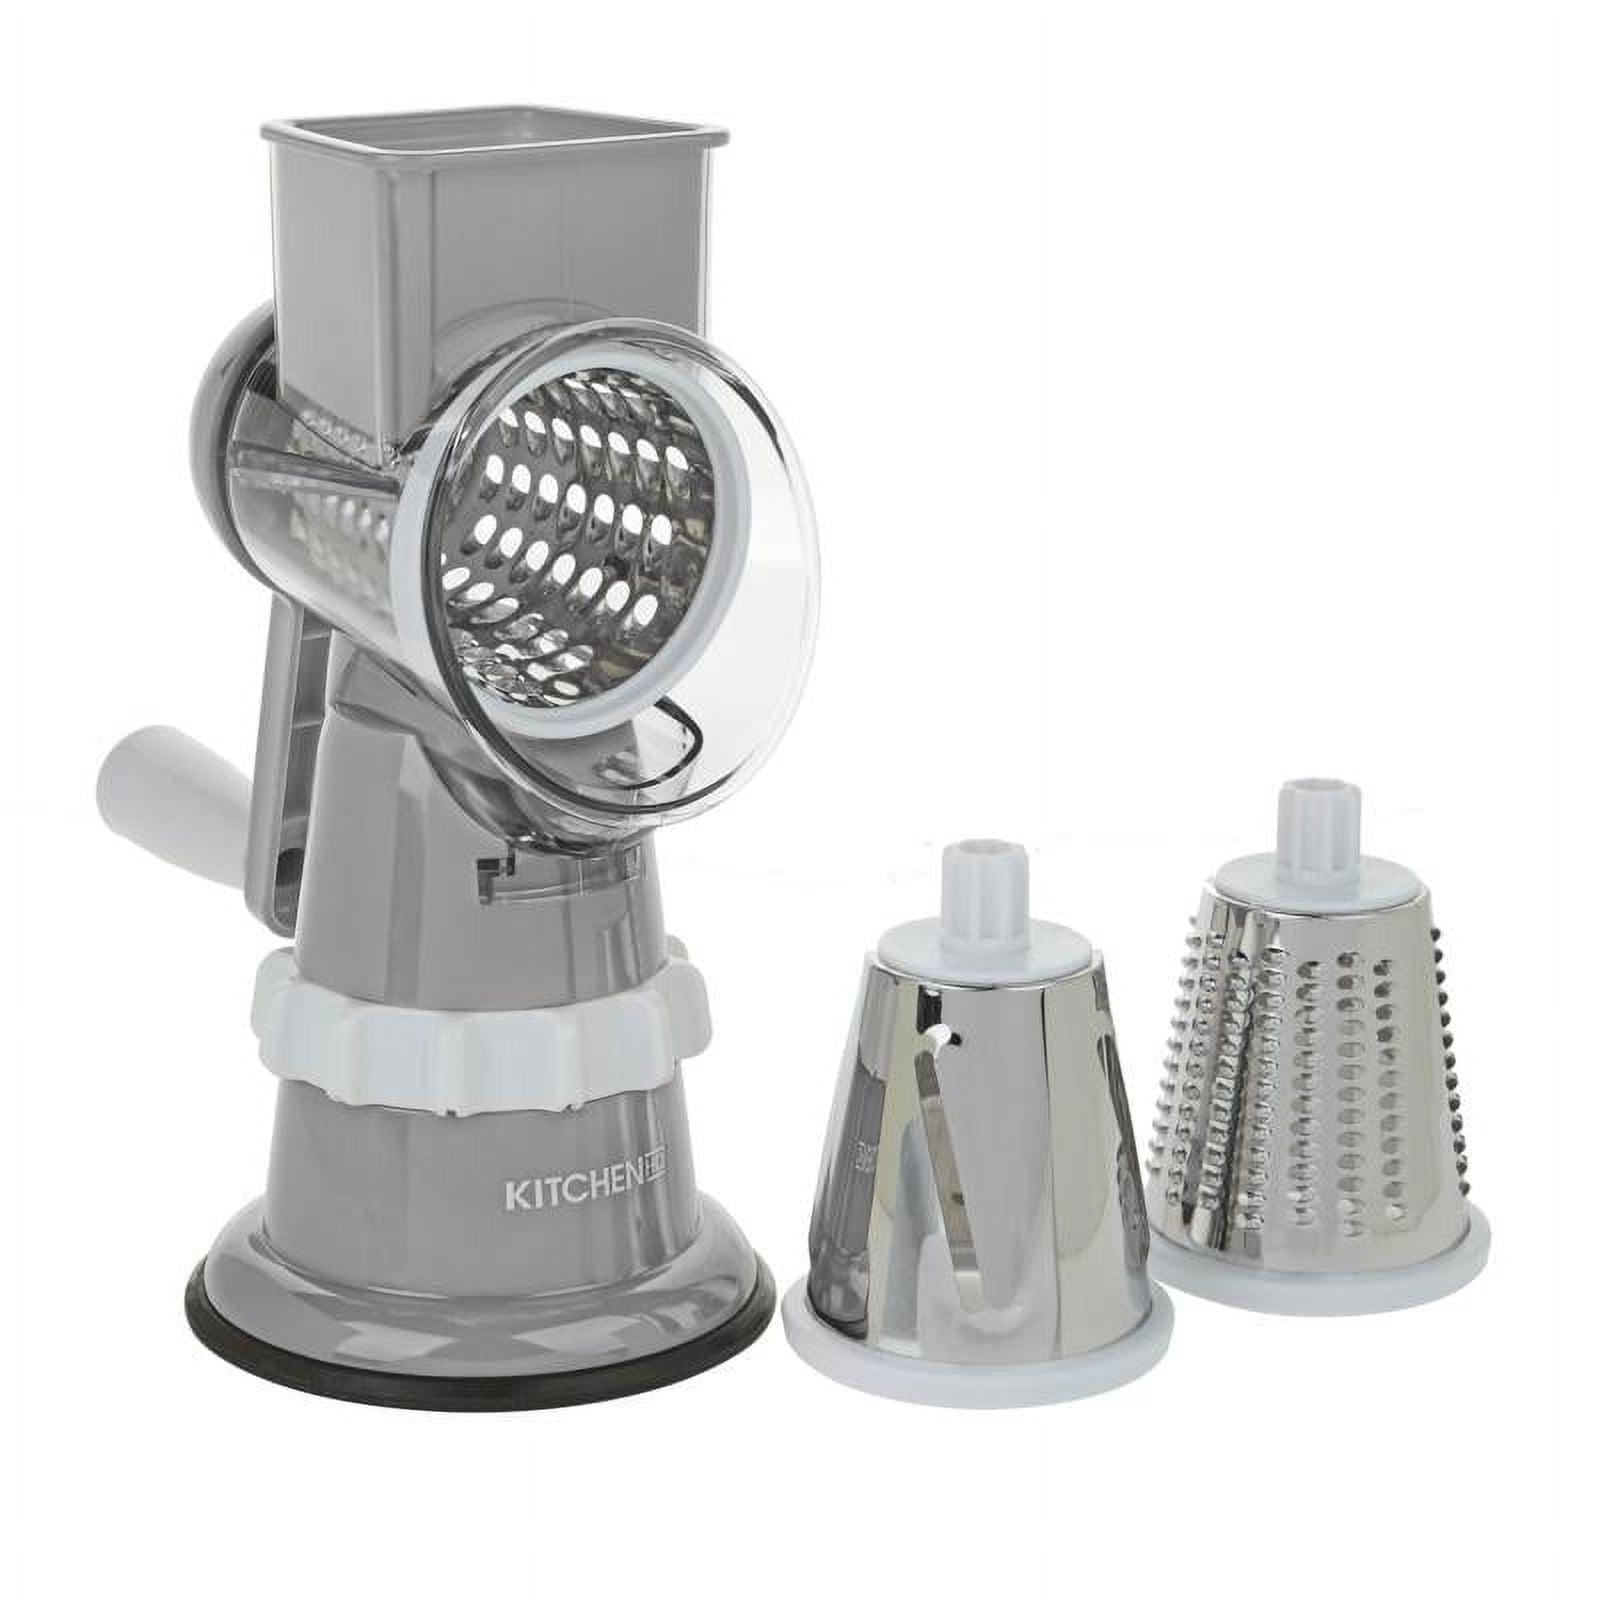 H2H House 2 Home Rotary Countertop Suction Slicer & Grater 3 Barrels Grey  New